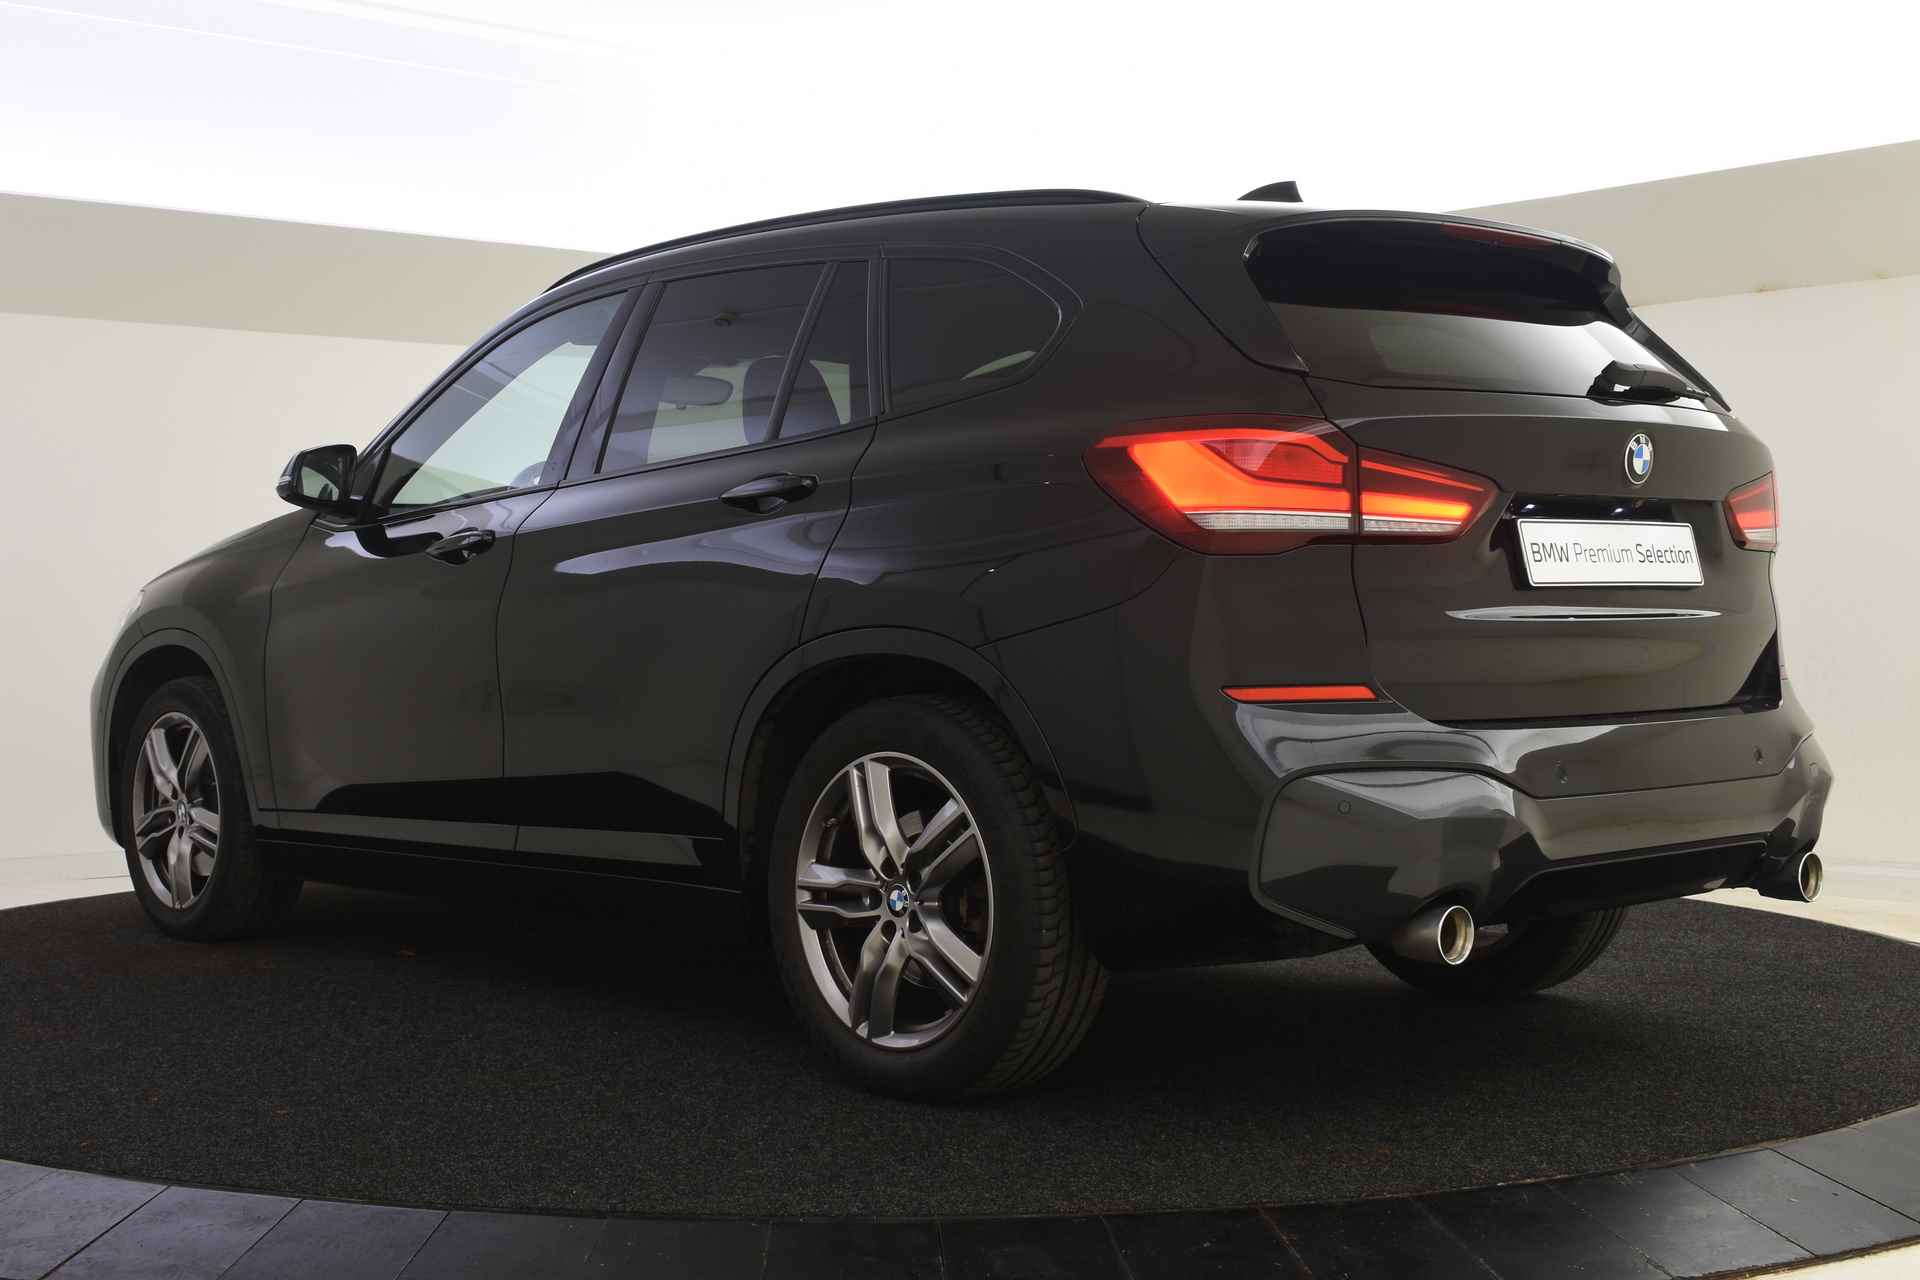 BMW X1 sDrive20i Executive M Sport Automaat / Sportstoelen / Adaptieve LED / Active Cruise Control / Achteruitrijcamera / Head-Up / Park Assistant / Driving Assistant Plus - 6/47